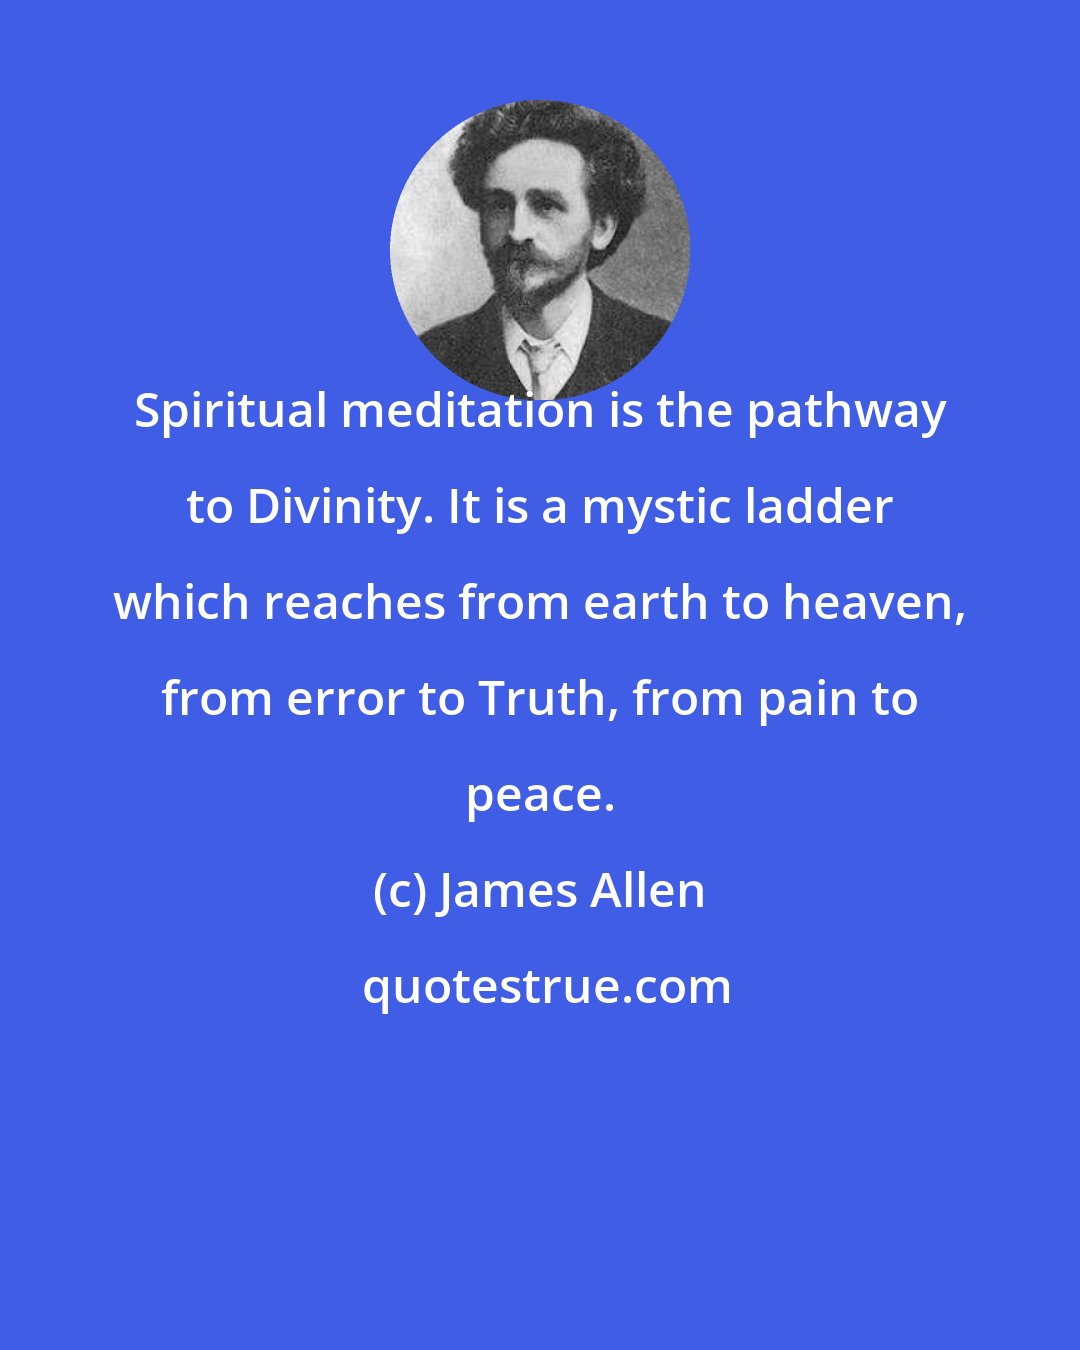 James Allen: Spiritual meditation is the pathway to Divinity. It is a mystic ladder which reaches from earth to heaven, from error to Truth, from pain to peace.